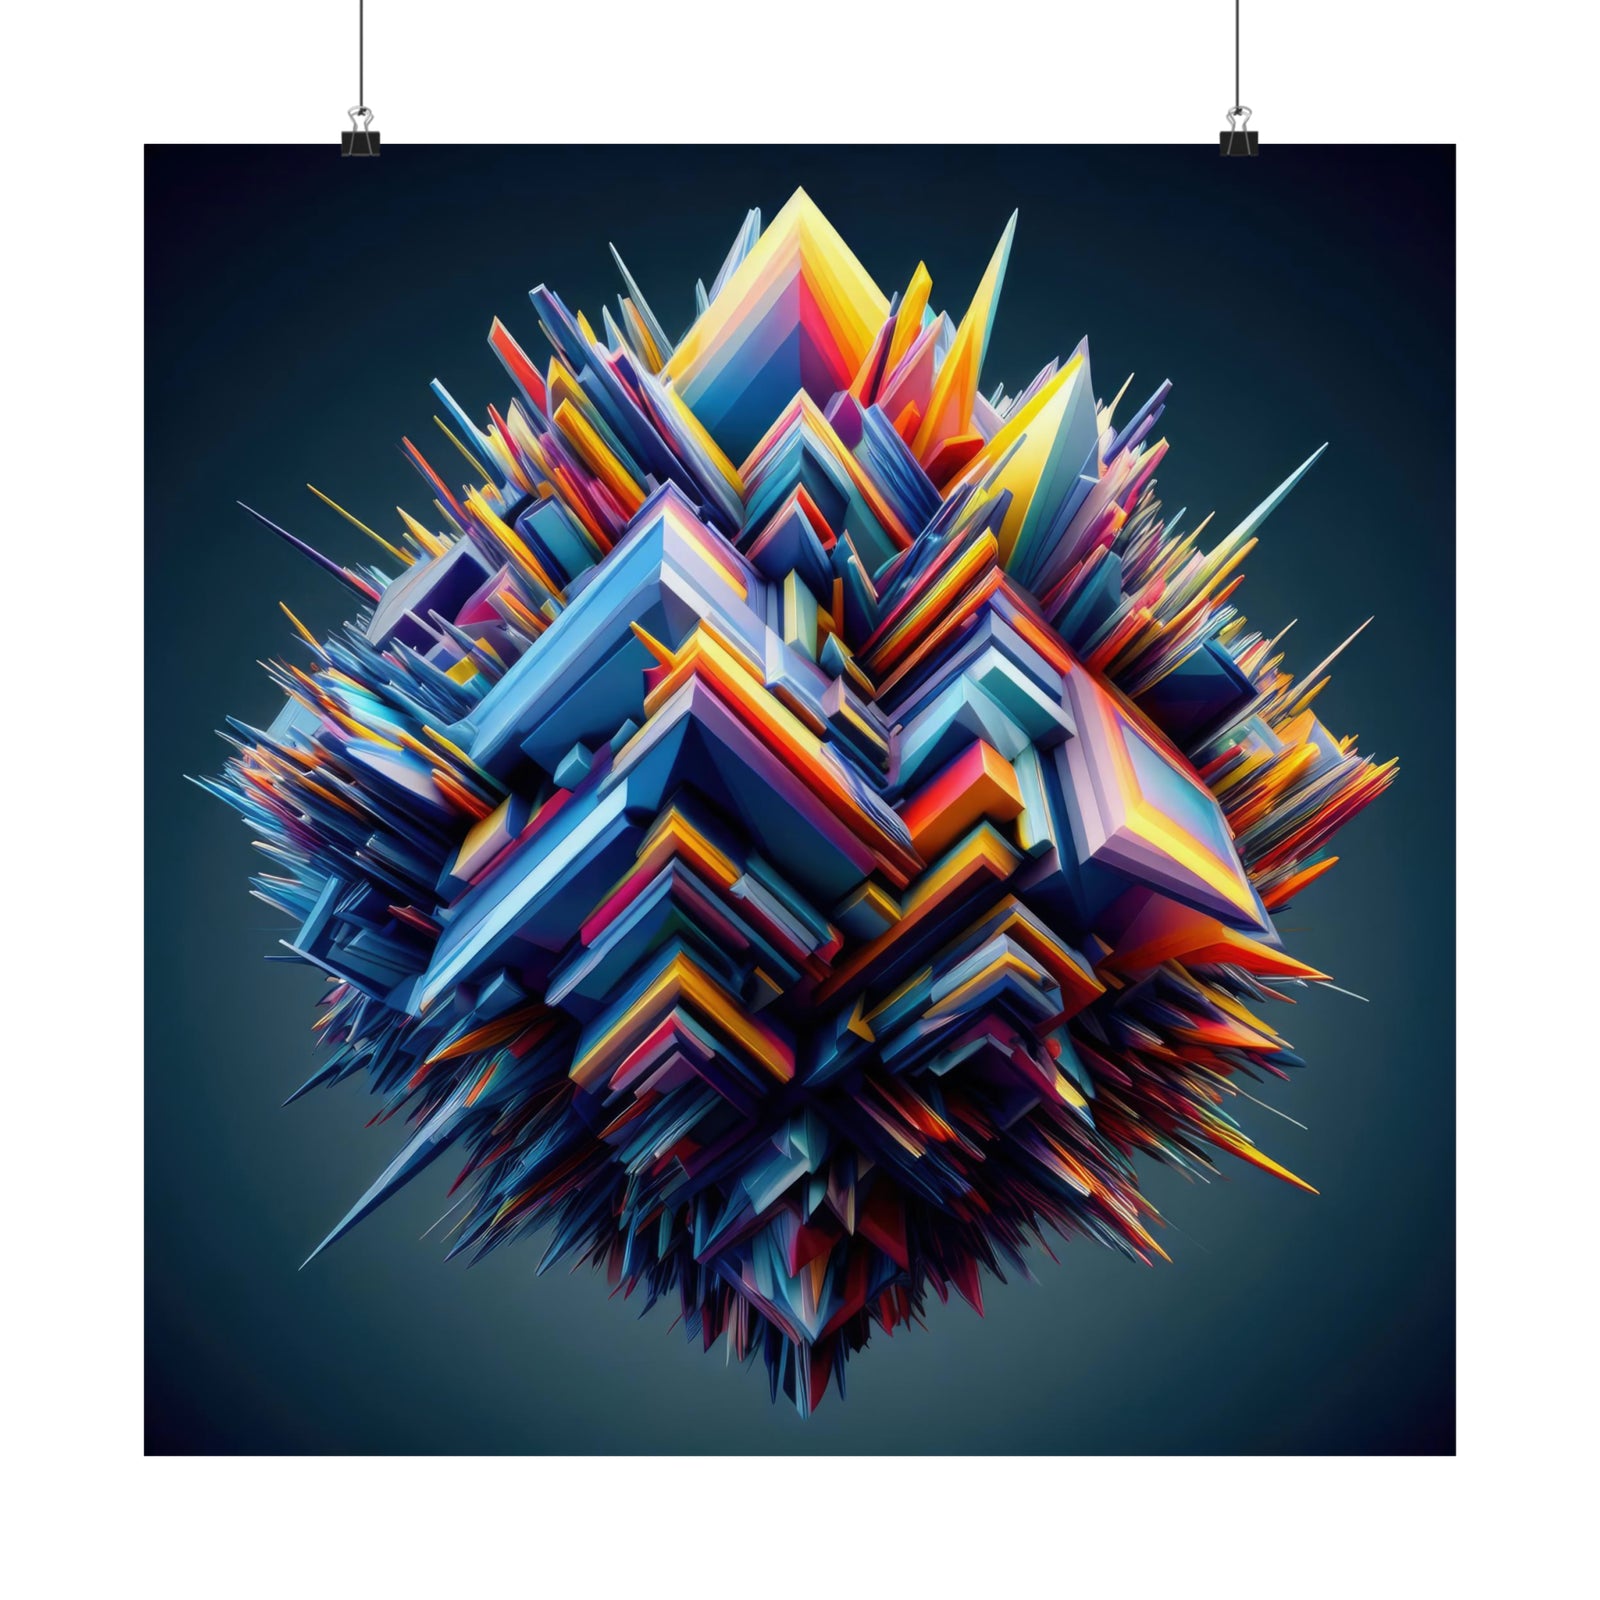 Octahedron - Shattered Perceptions Poster